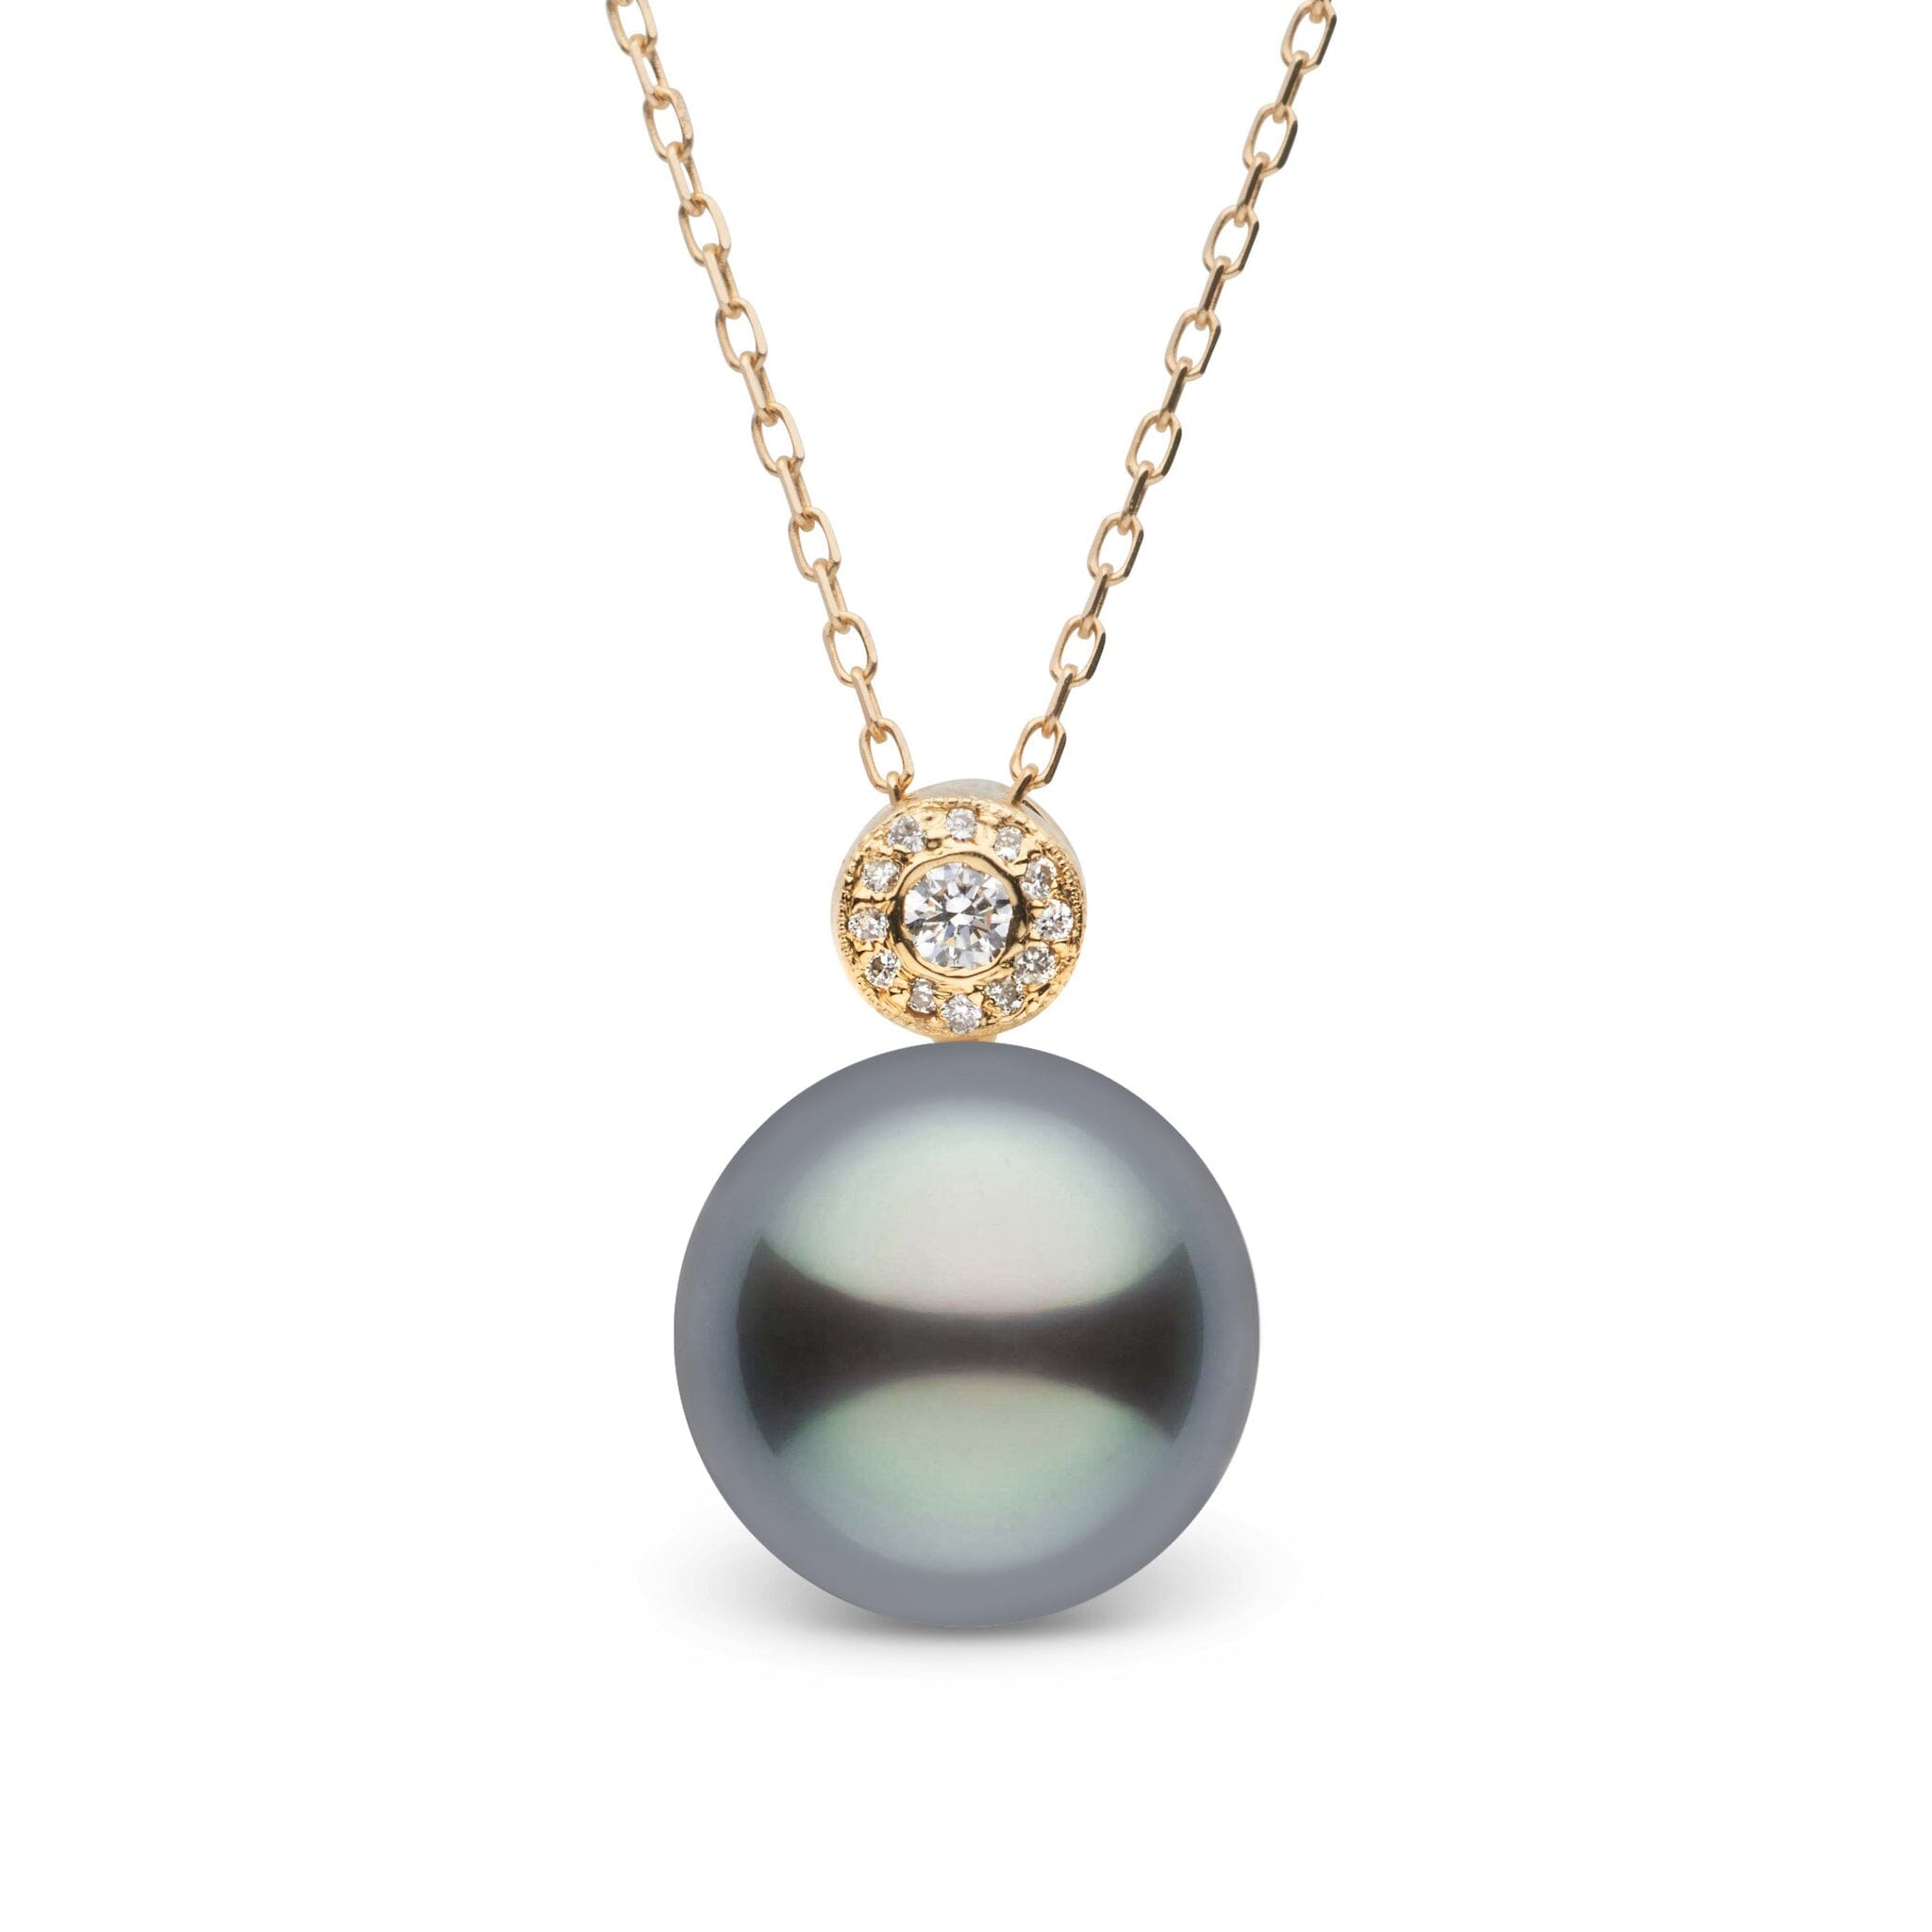 Aura Collection 11.0-12.0 mm Tahitian Pearl and Diamond Pendant